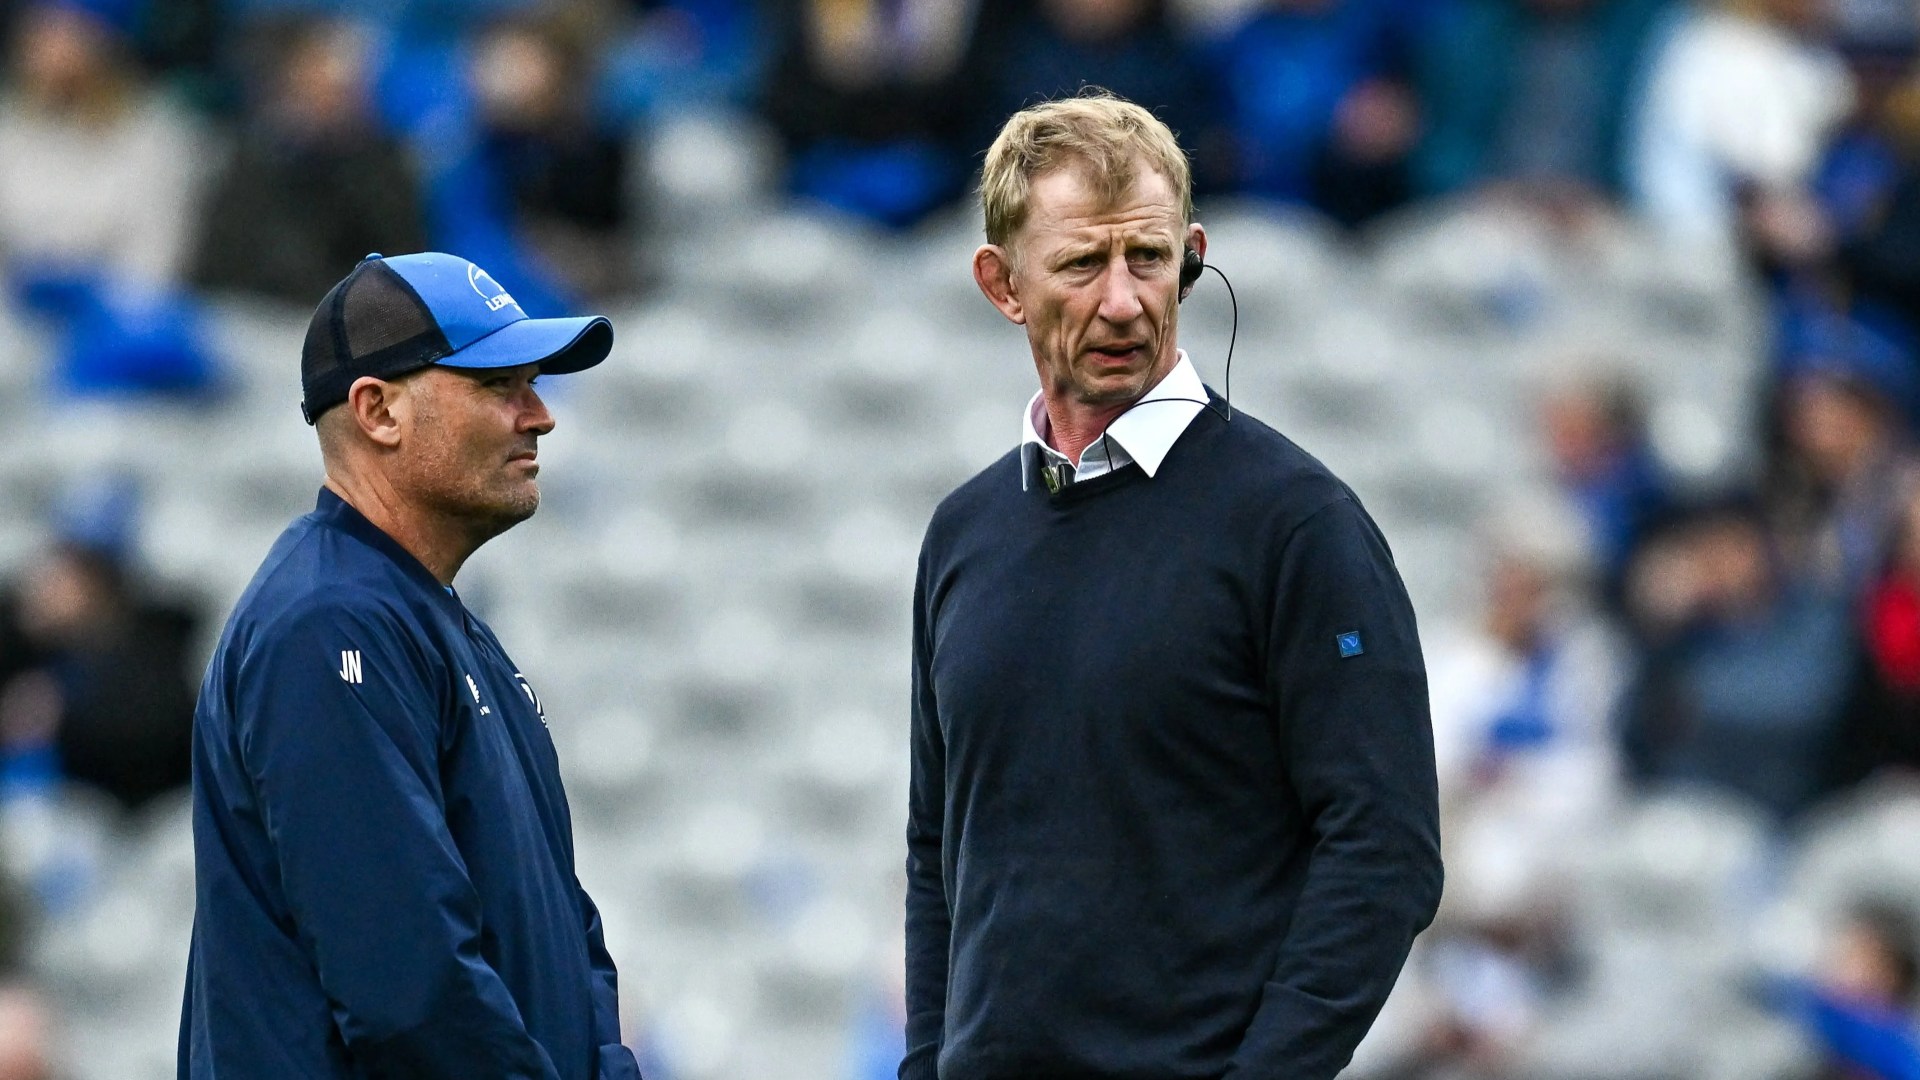 Leo Cullen hails record-breaking fans in Croke Park but insists Leinster must play better in Champions Cup final [Video]